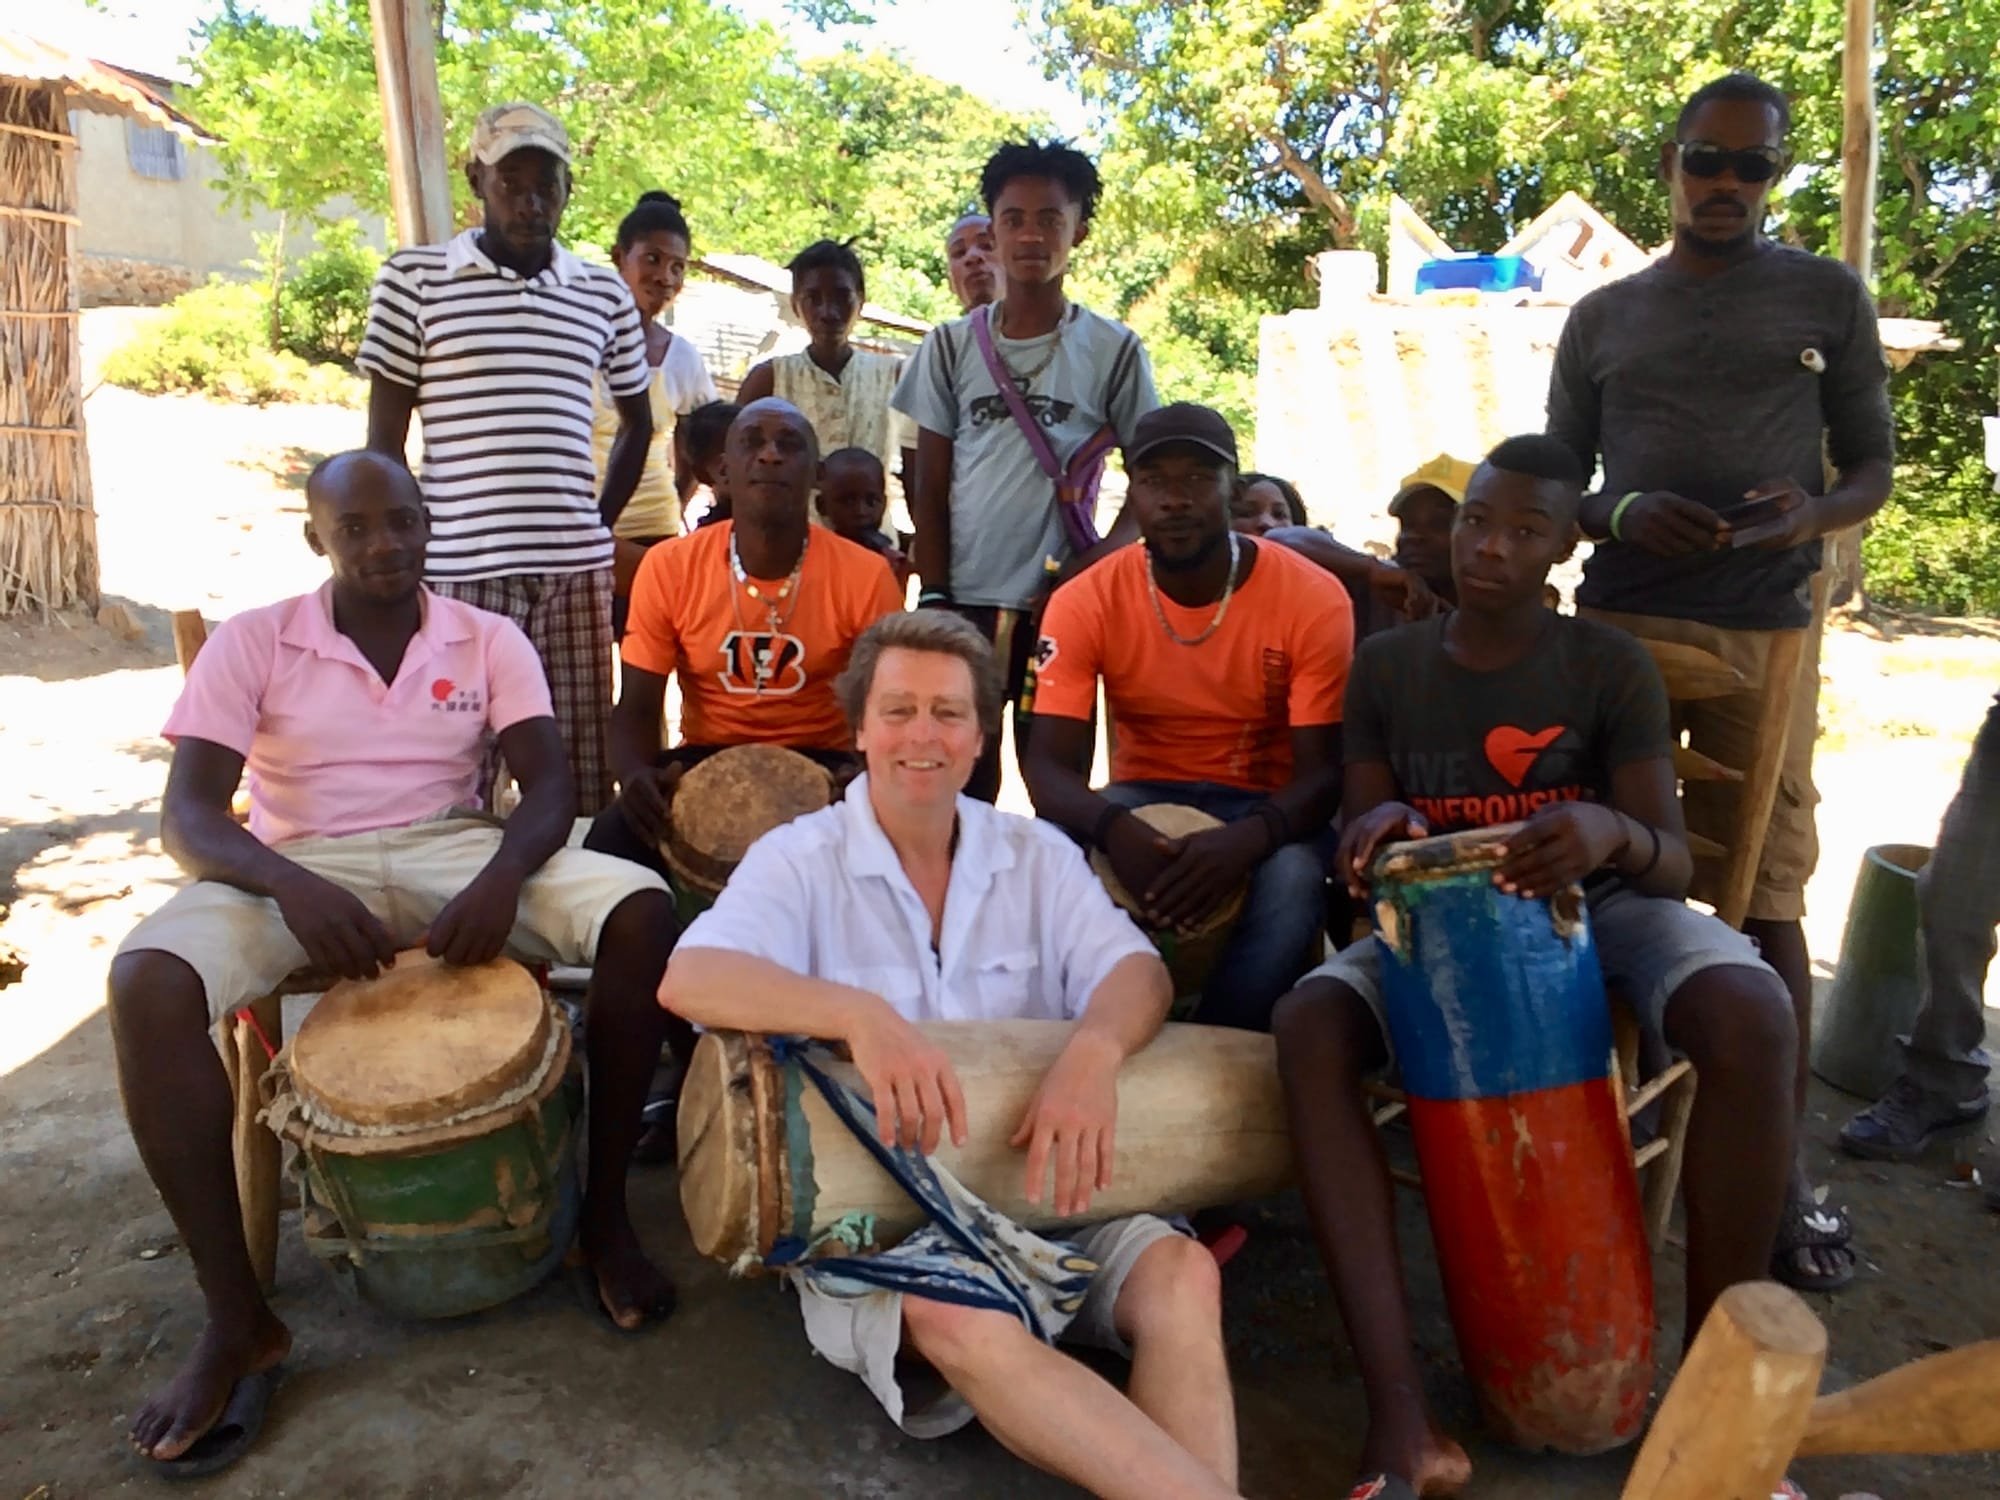 Rick with Artistile "Doudou" Sonnelle and his troop, Lanfigee, Haiti.